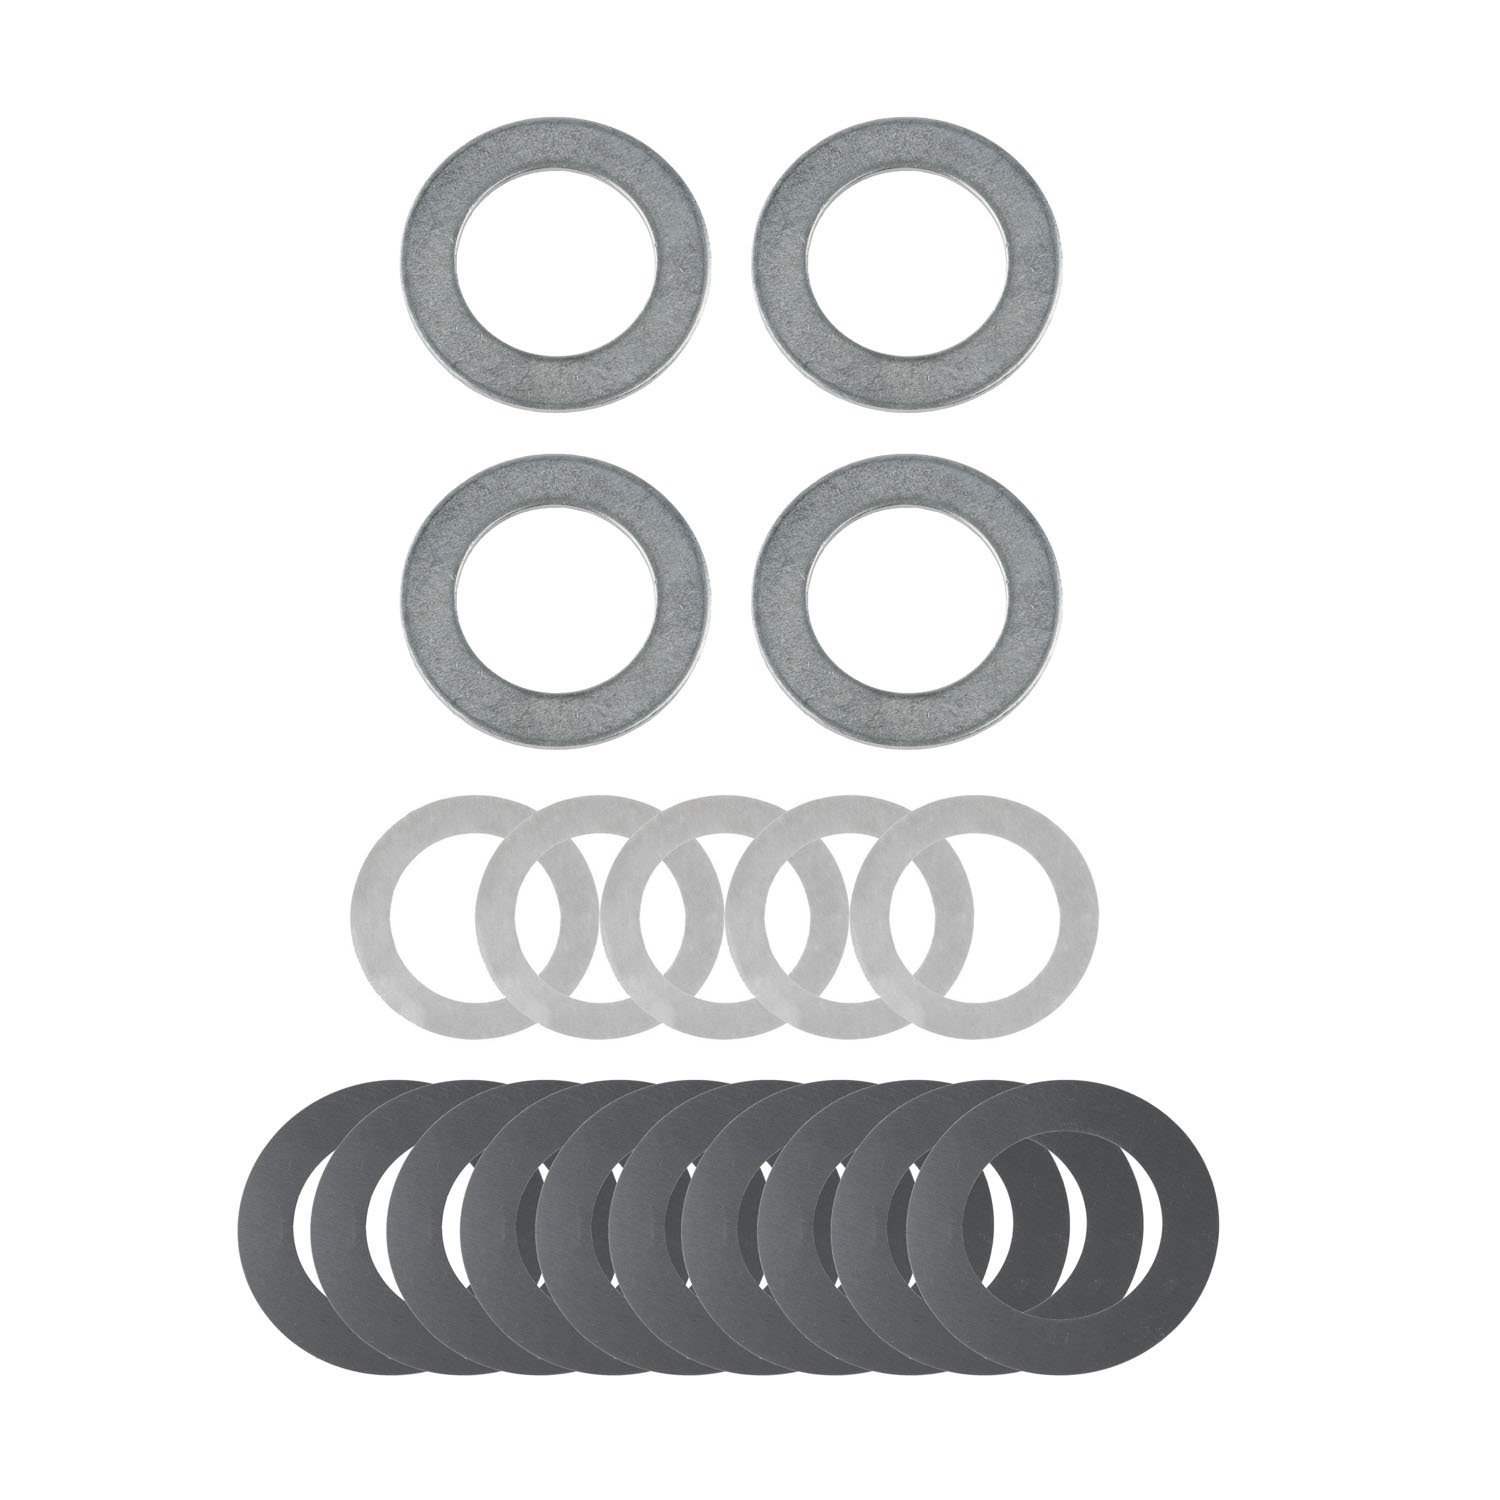 Carrier and Pinion Shim Kit for GM 7.5/7.625 in., 7.75 in. IRS, 8.2 in.